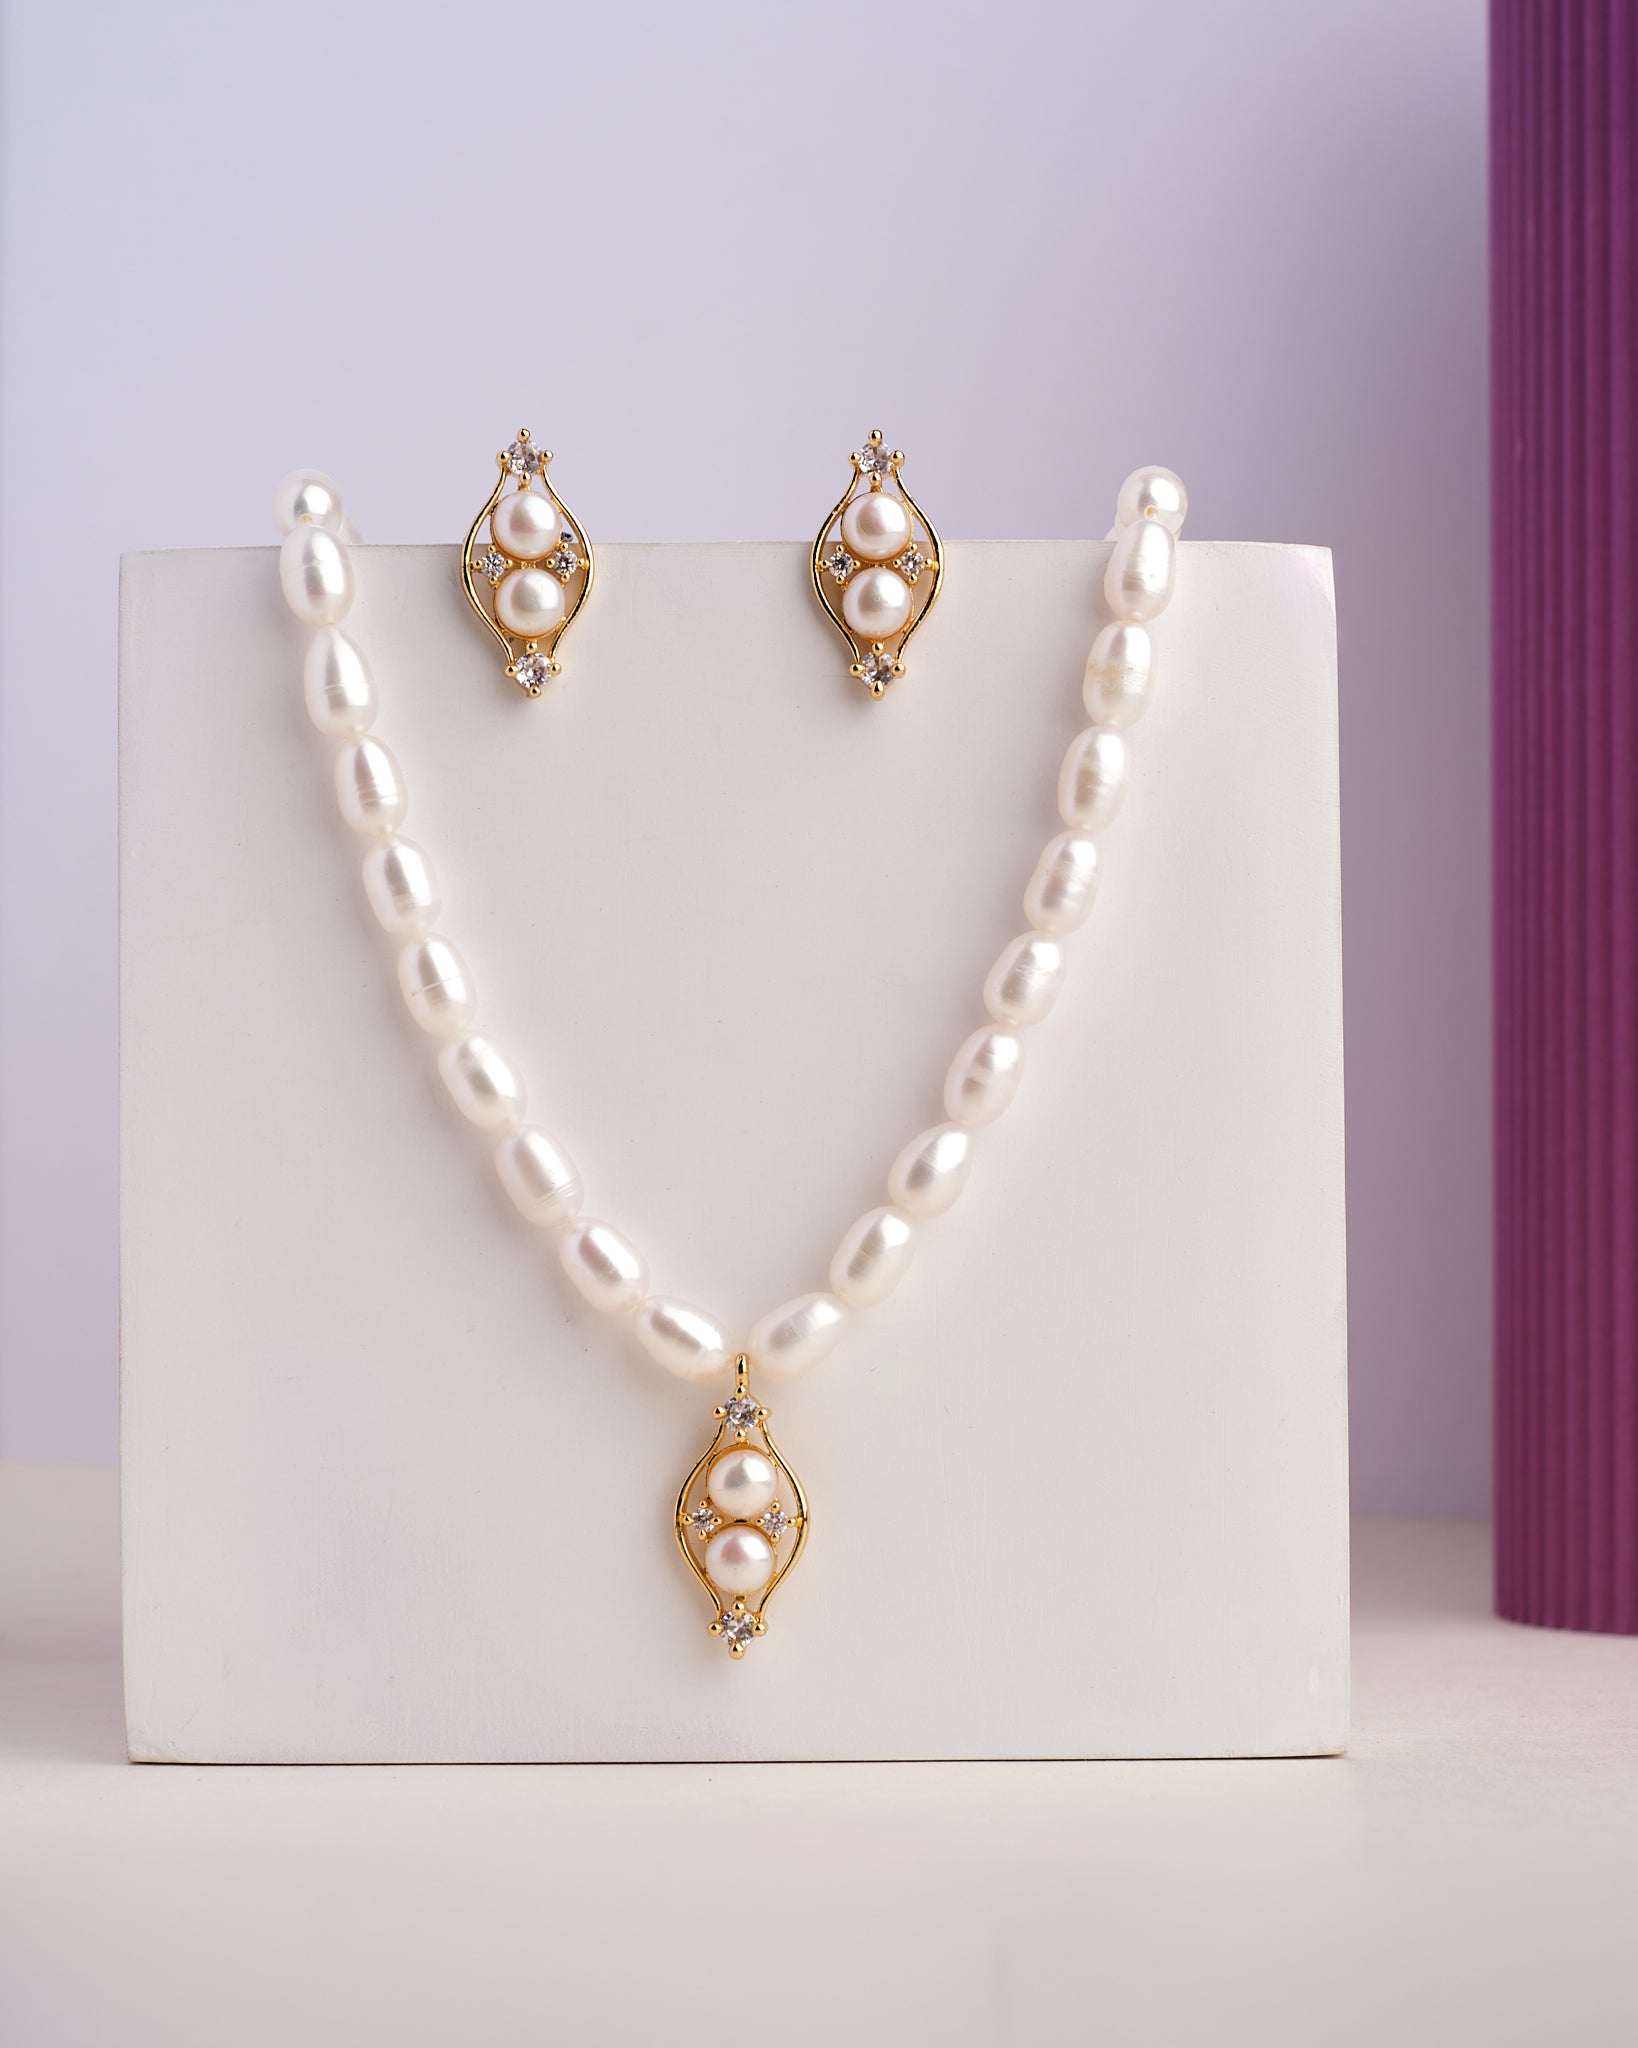 Sadhya -The Stellar Reflections Pearl Necklace Set